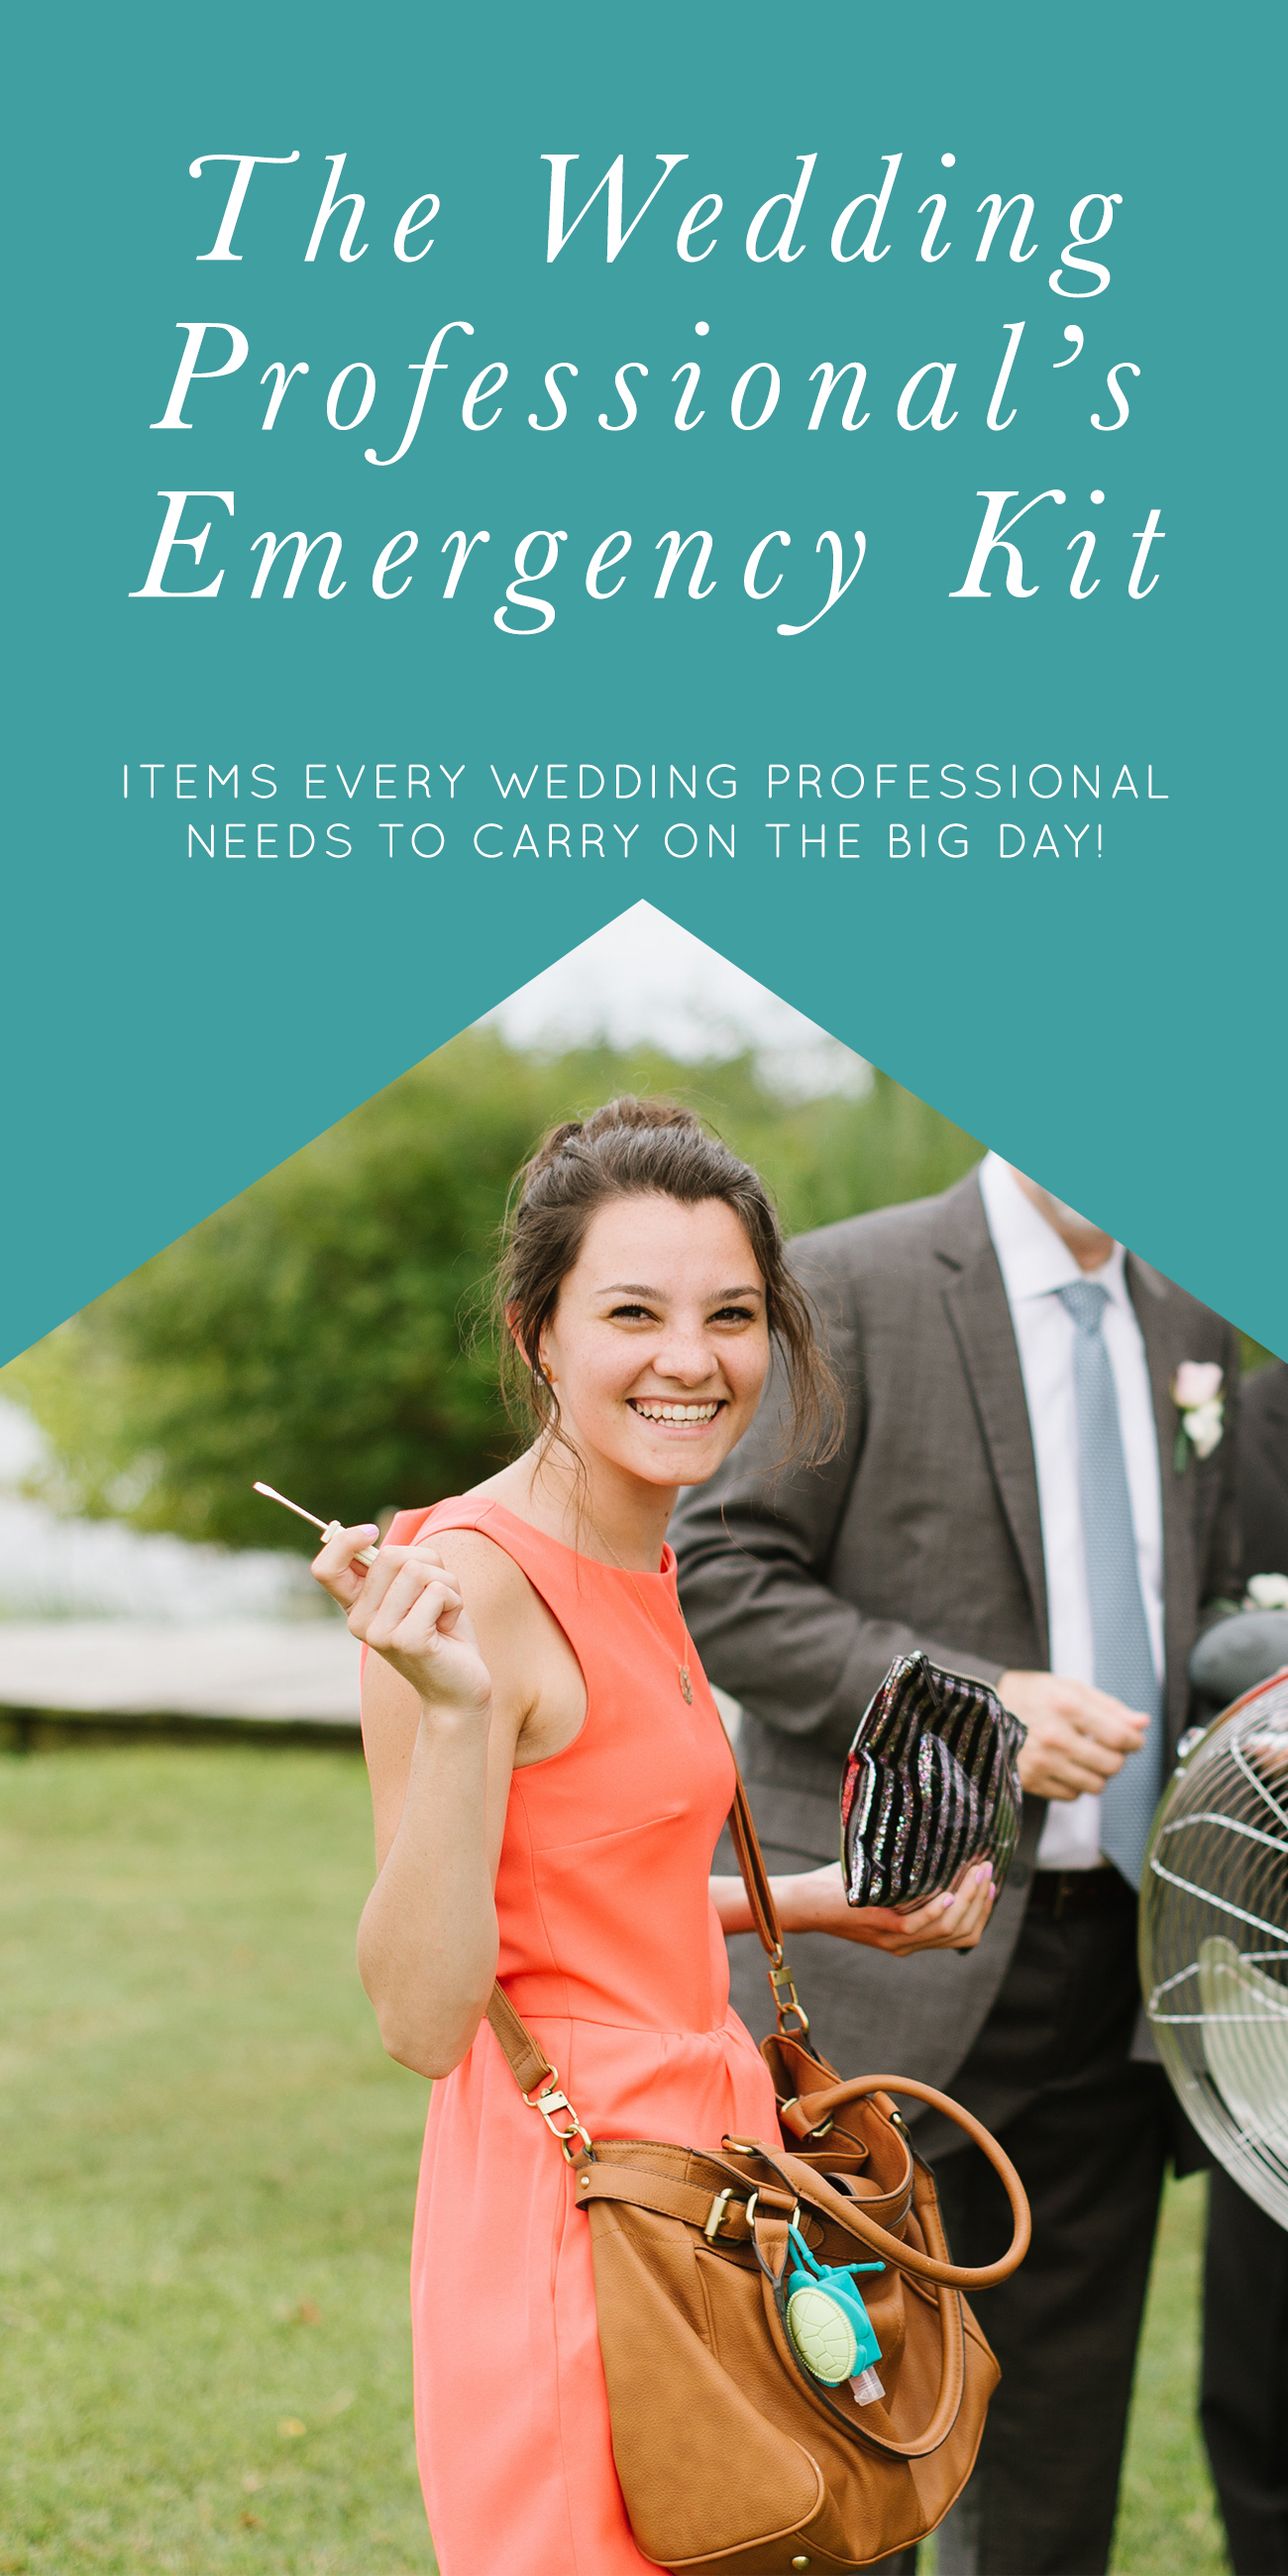 Wedding Professionals Emergency Kit for Photographers, Planners, and Bridesmaids | Natalie Franke